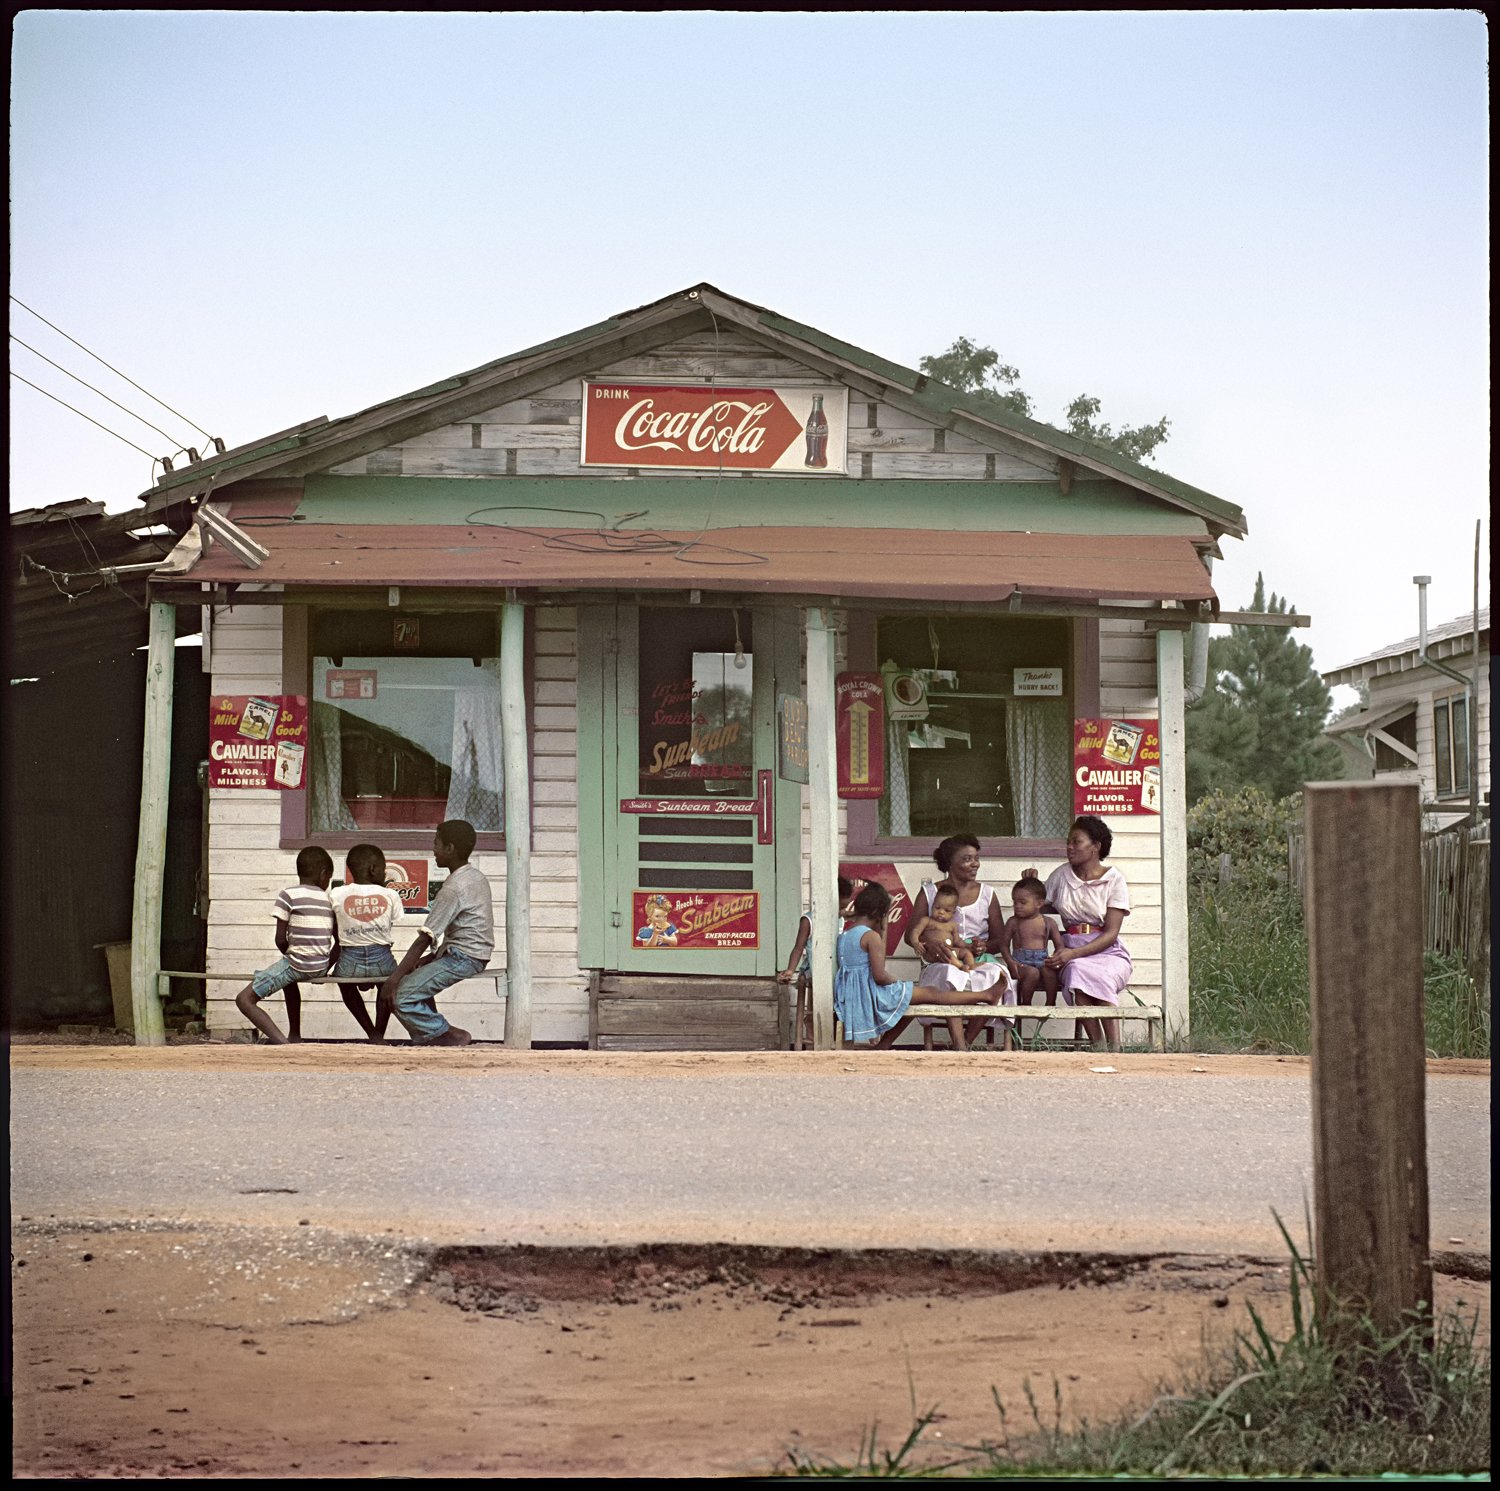  Gordon Parks  Store Front, Mobile, Alabama , 1956 Edition: 10/25 Archival pigment print  14 x 14 in. (image size)  The Do Good Fund, Inc., 2015-011 Photograph by Gordon Parks Courtesy of and copyright The Gordon Parks Foundation 